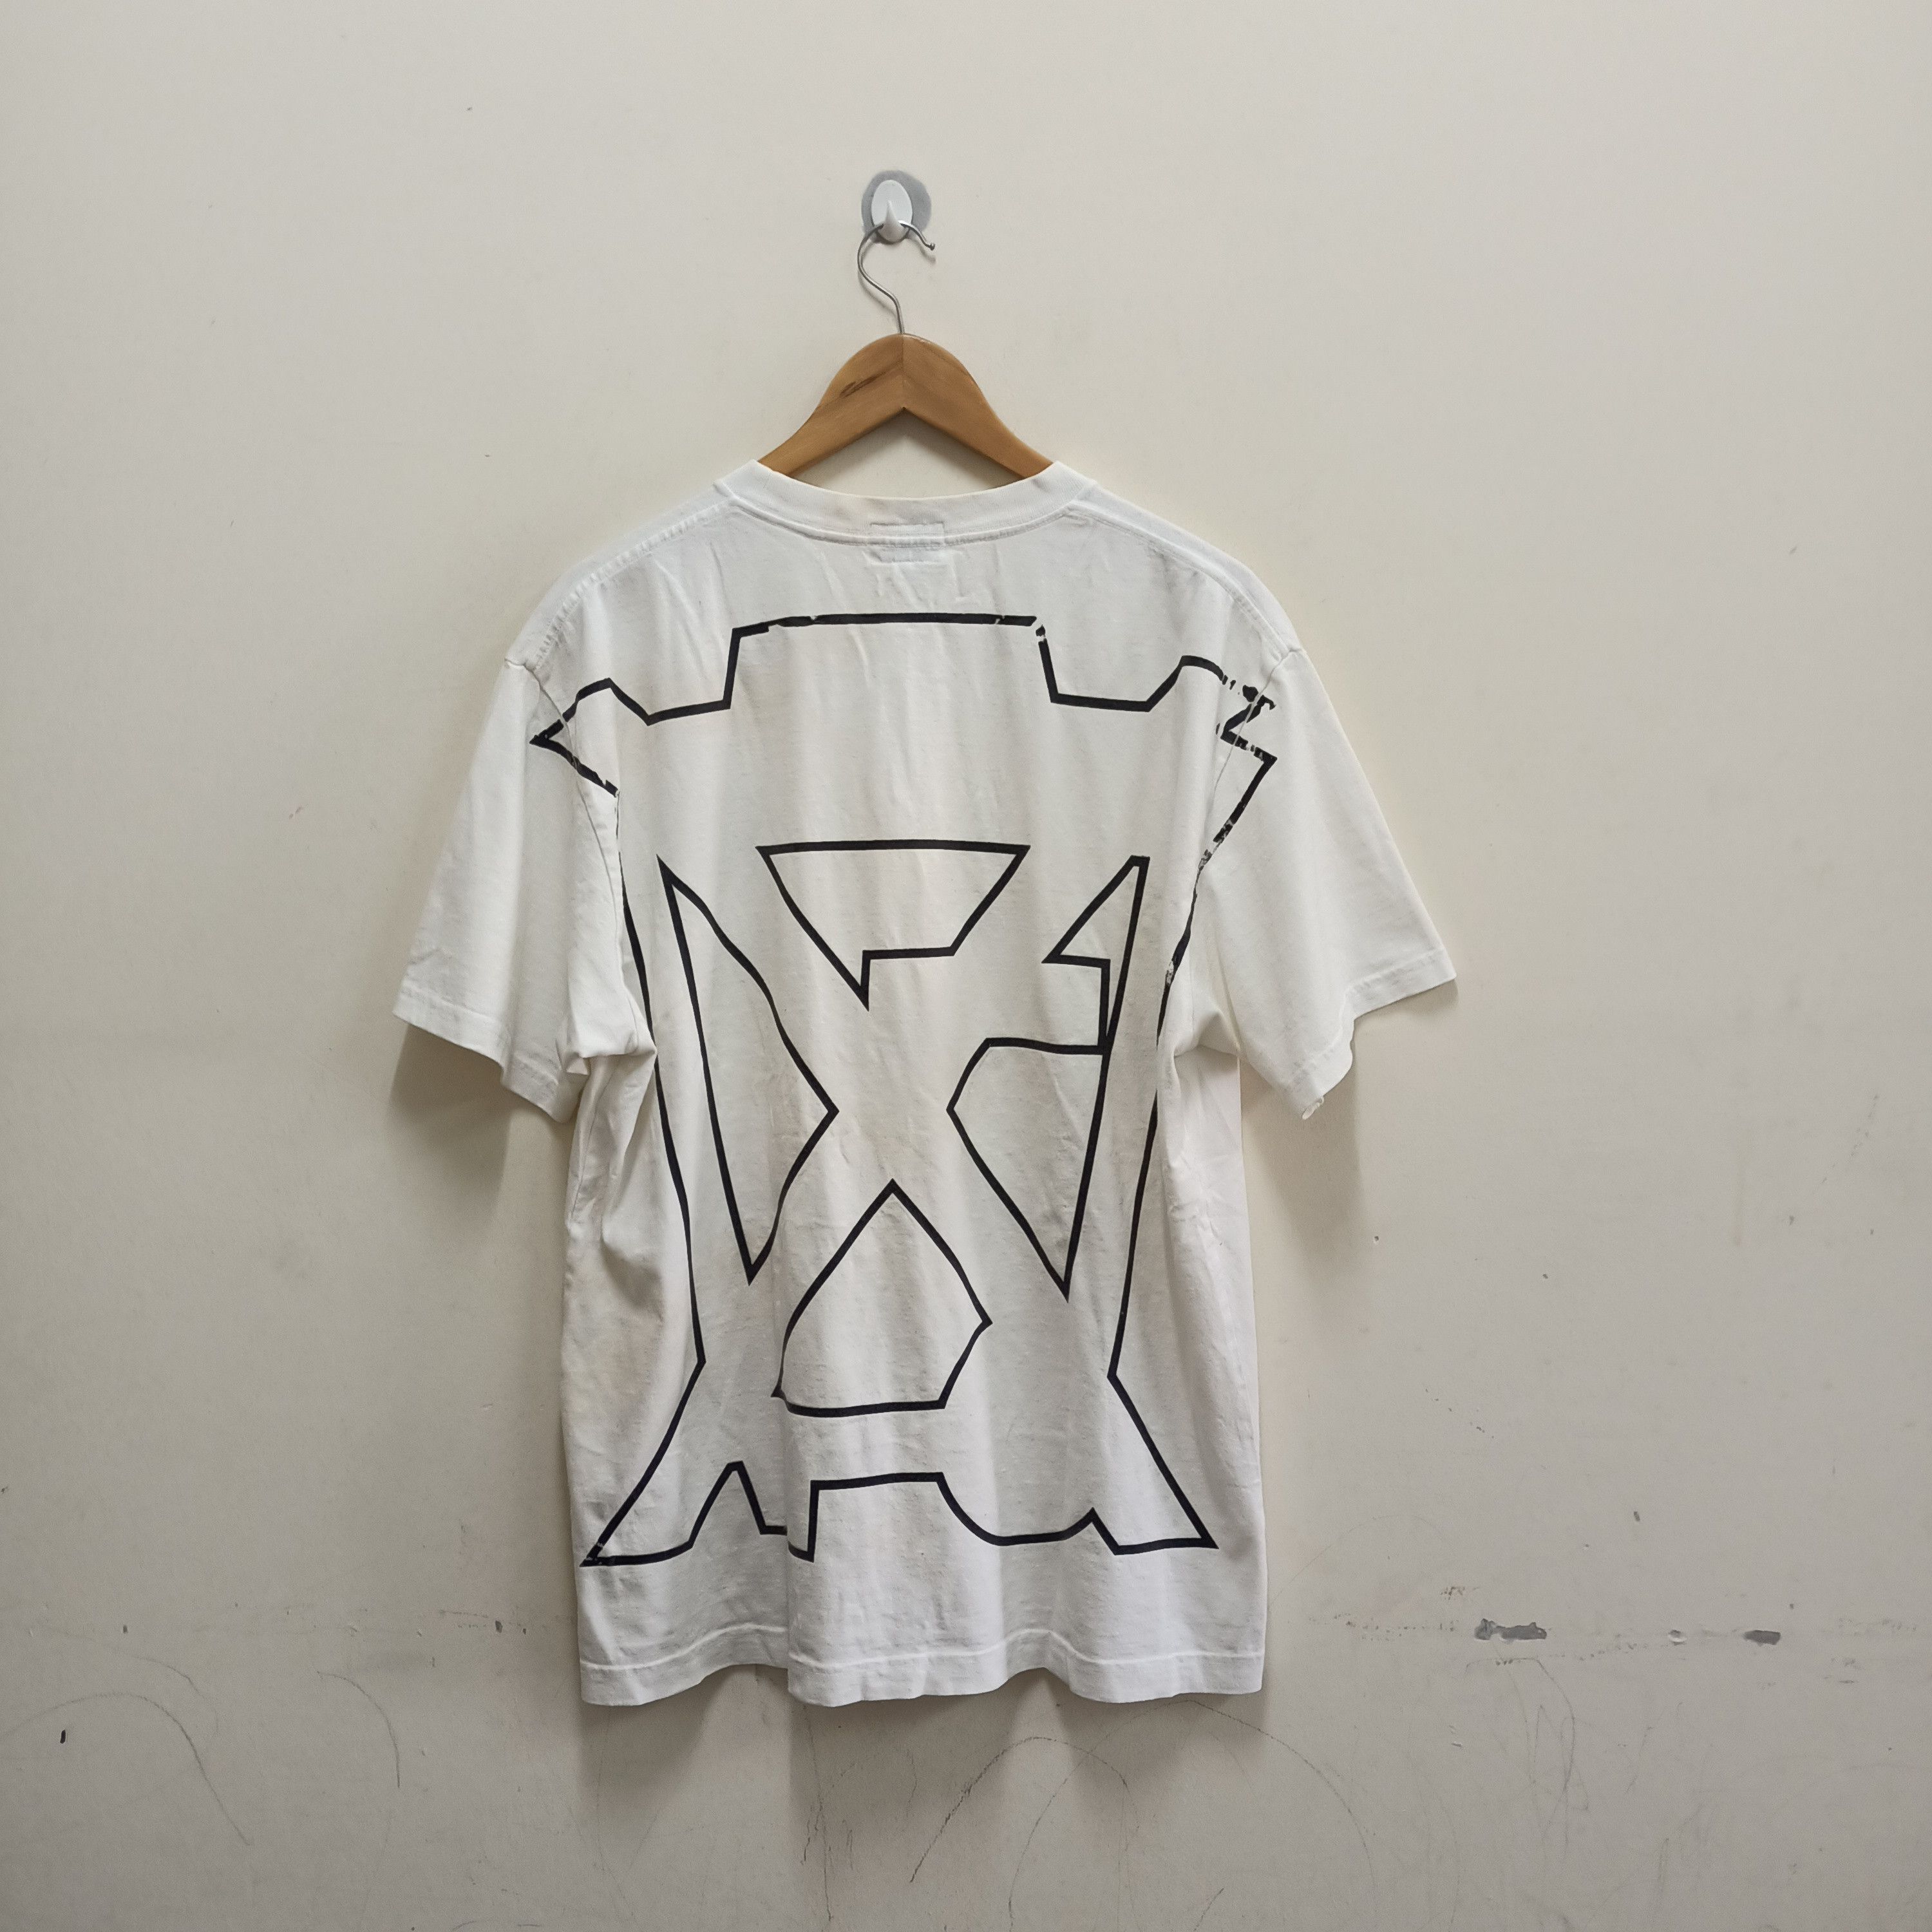 Cav Empt CavEmpt t-shirt by Potlatch Limited Made in Japan | Grailed